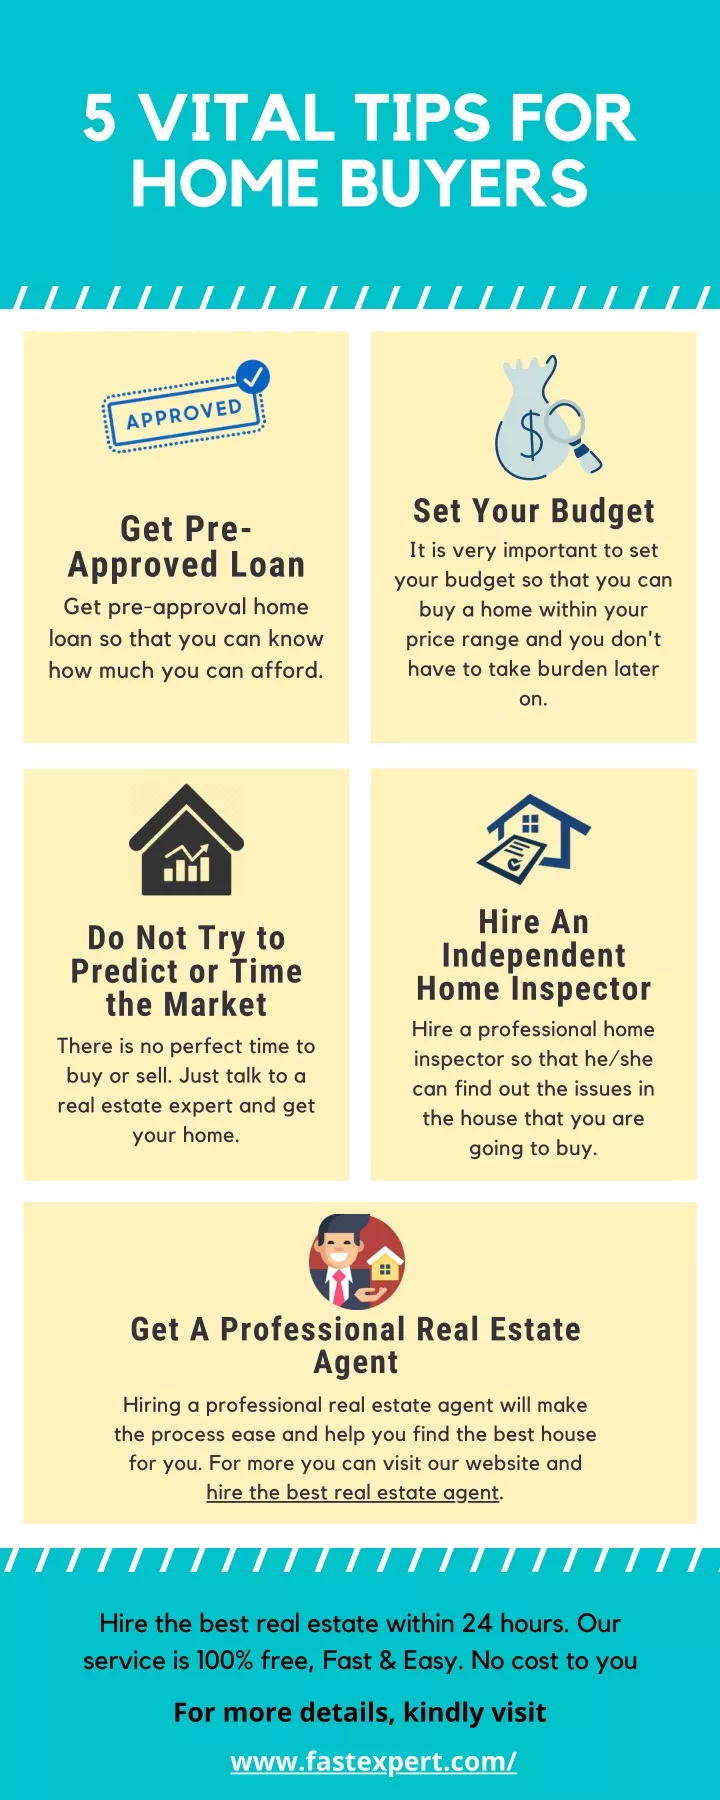 5 vital tips for home buyers